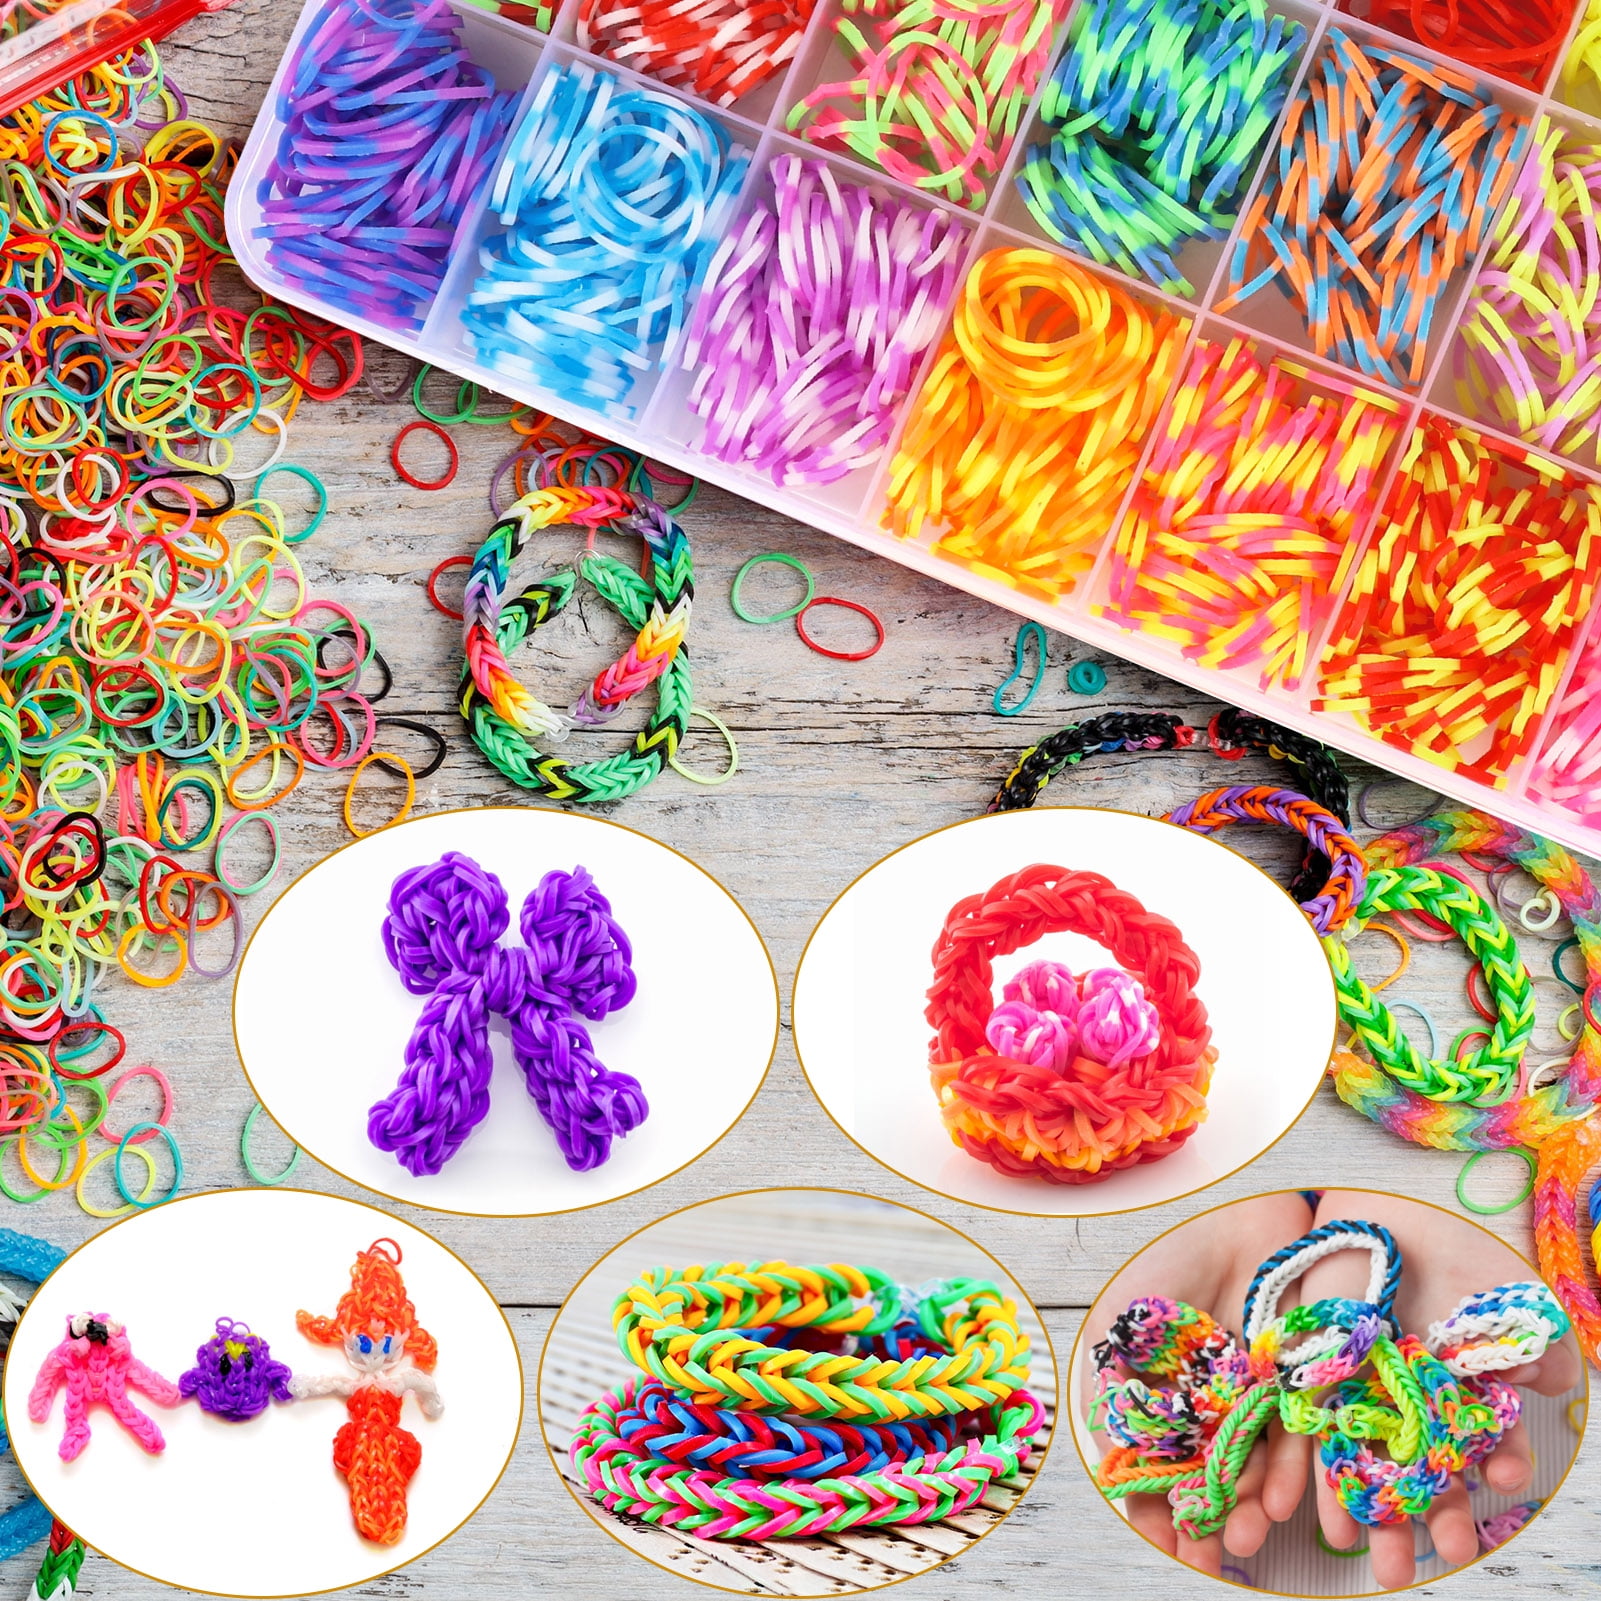 GetUSCart- New Year Deal - Arts and Crafts for Girls - Best Birthday  Toys/DIY for Kids - Premium Bracelet (Jewelry) Making Kit - Friendship Bracelets  Maker/Craft Kits with Loom, Rubber Bands